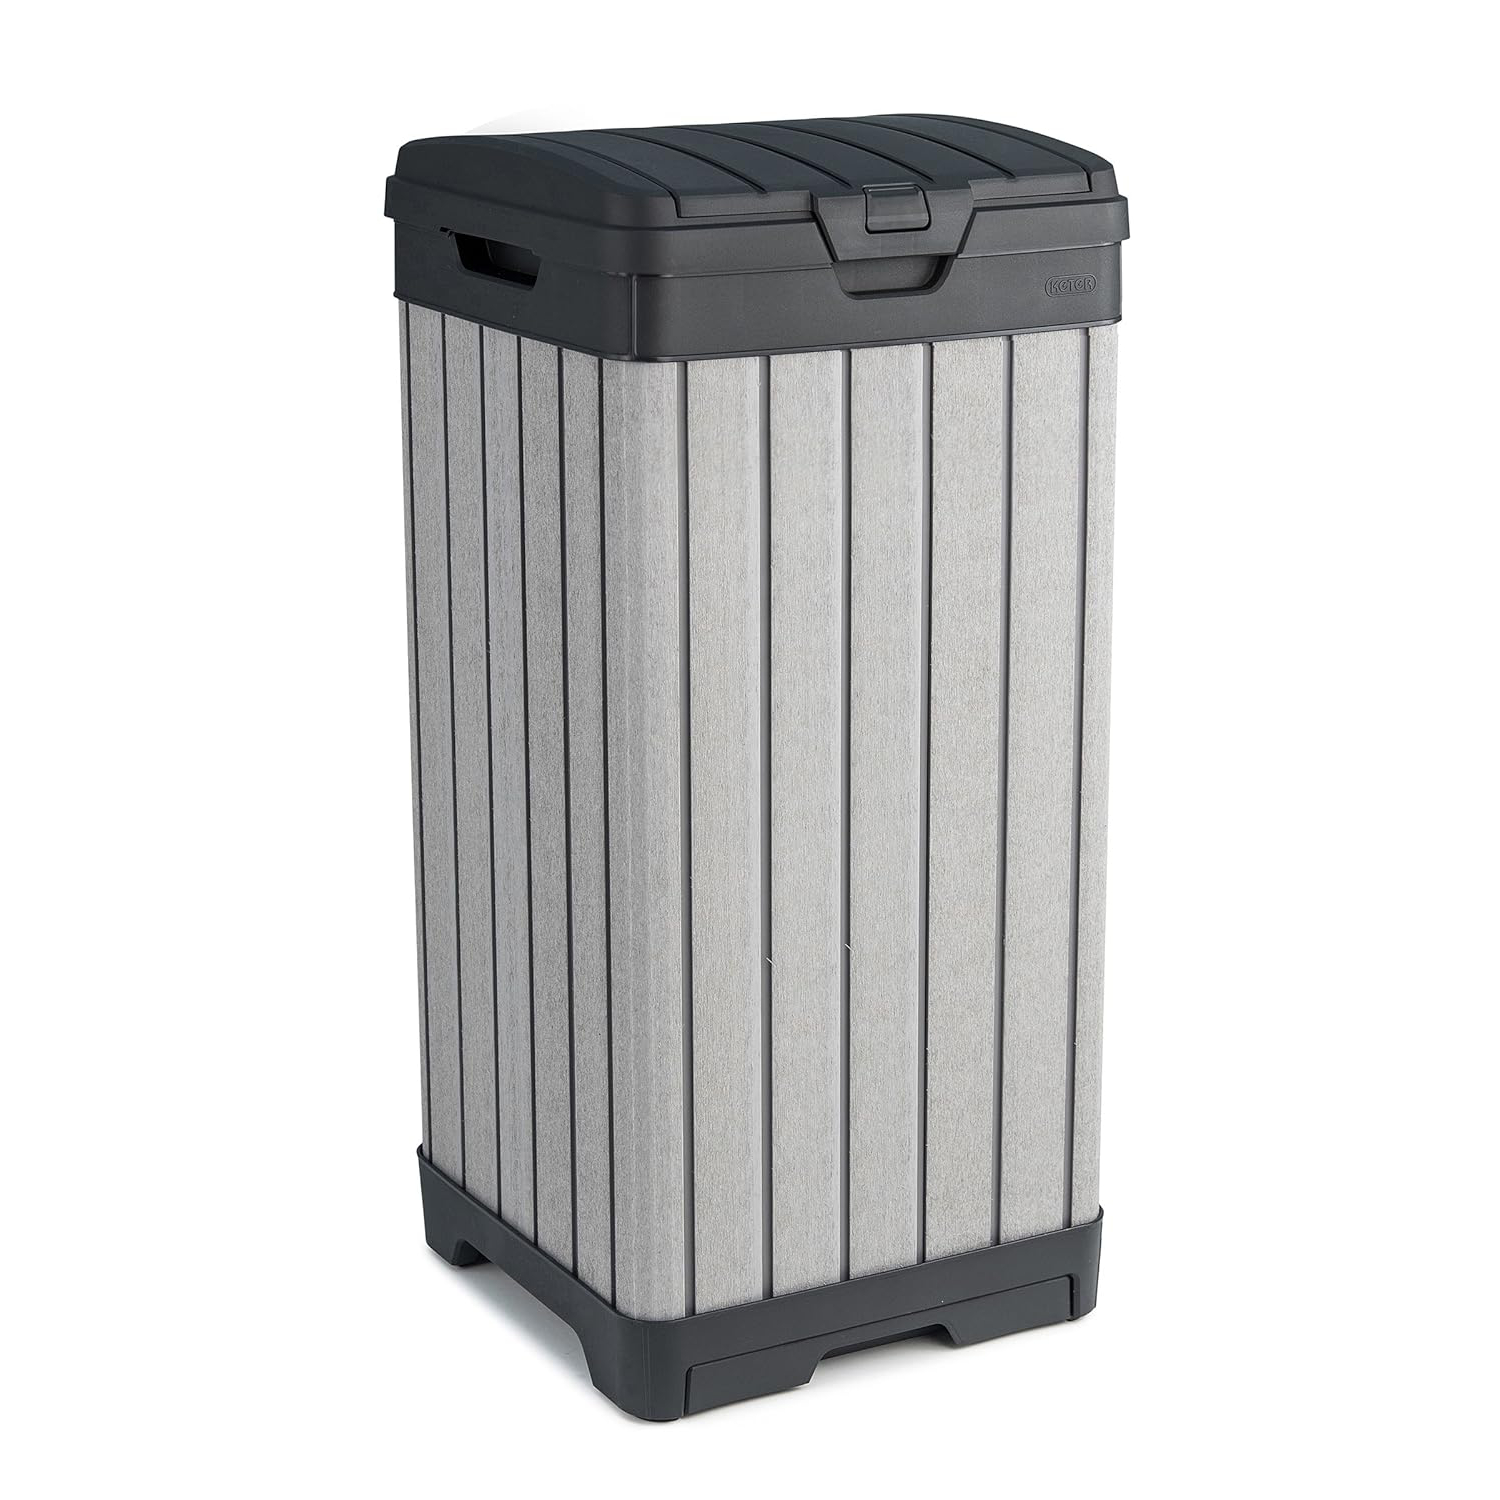 Keter Rockford Resin 38 Gallon Trash Can with Lid and Drip Tray for Easy Cleaning-Perfect for Patios